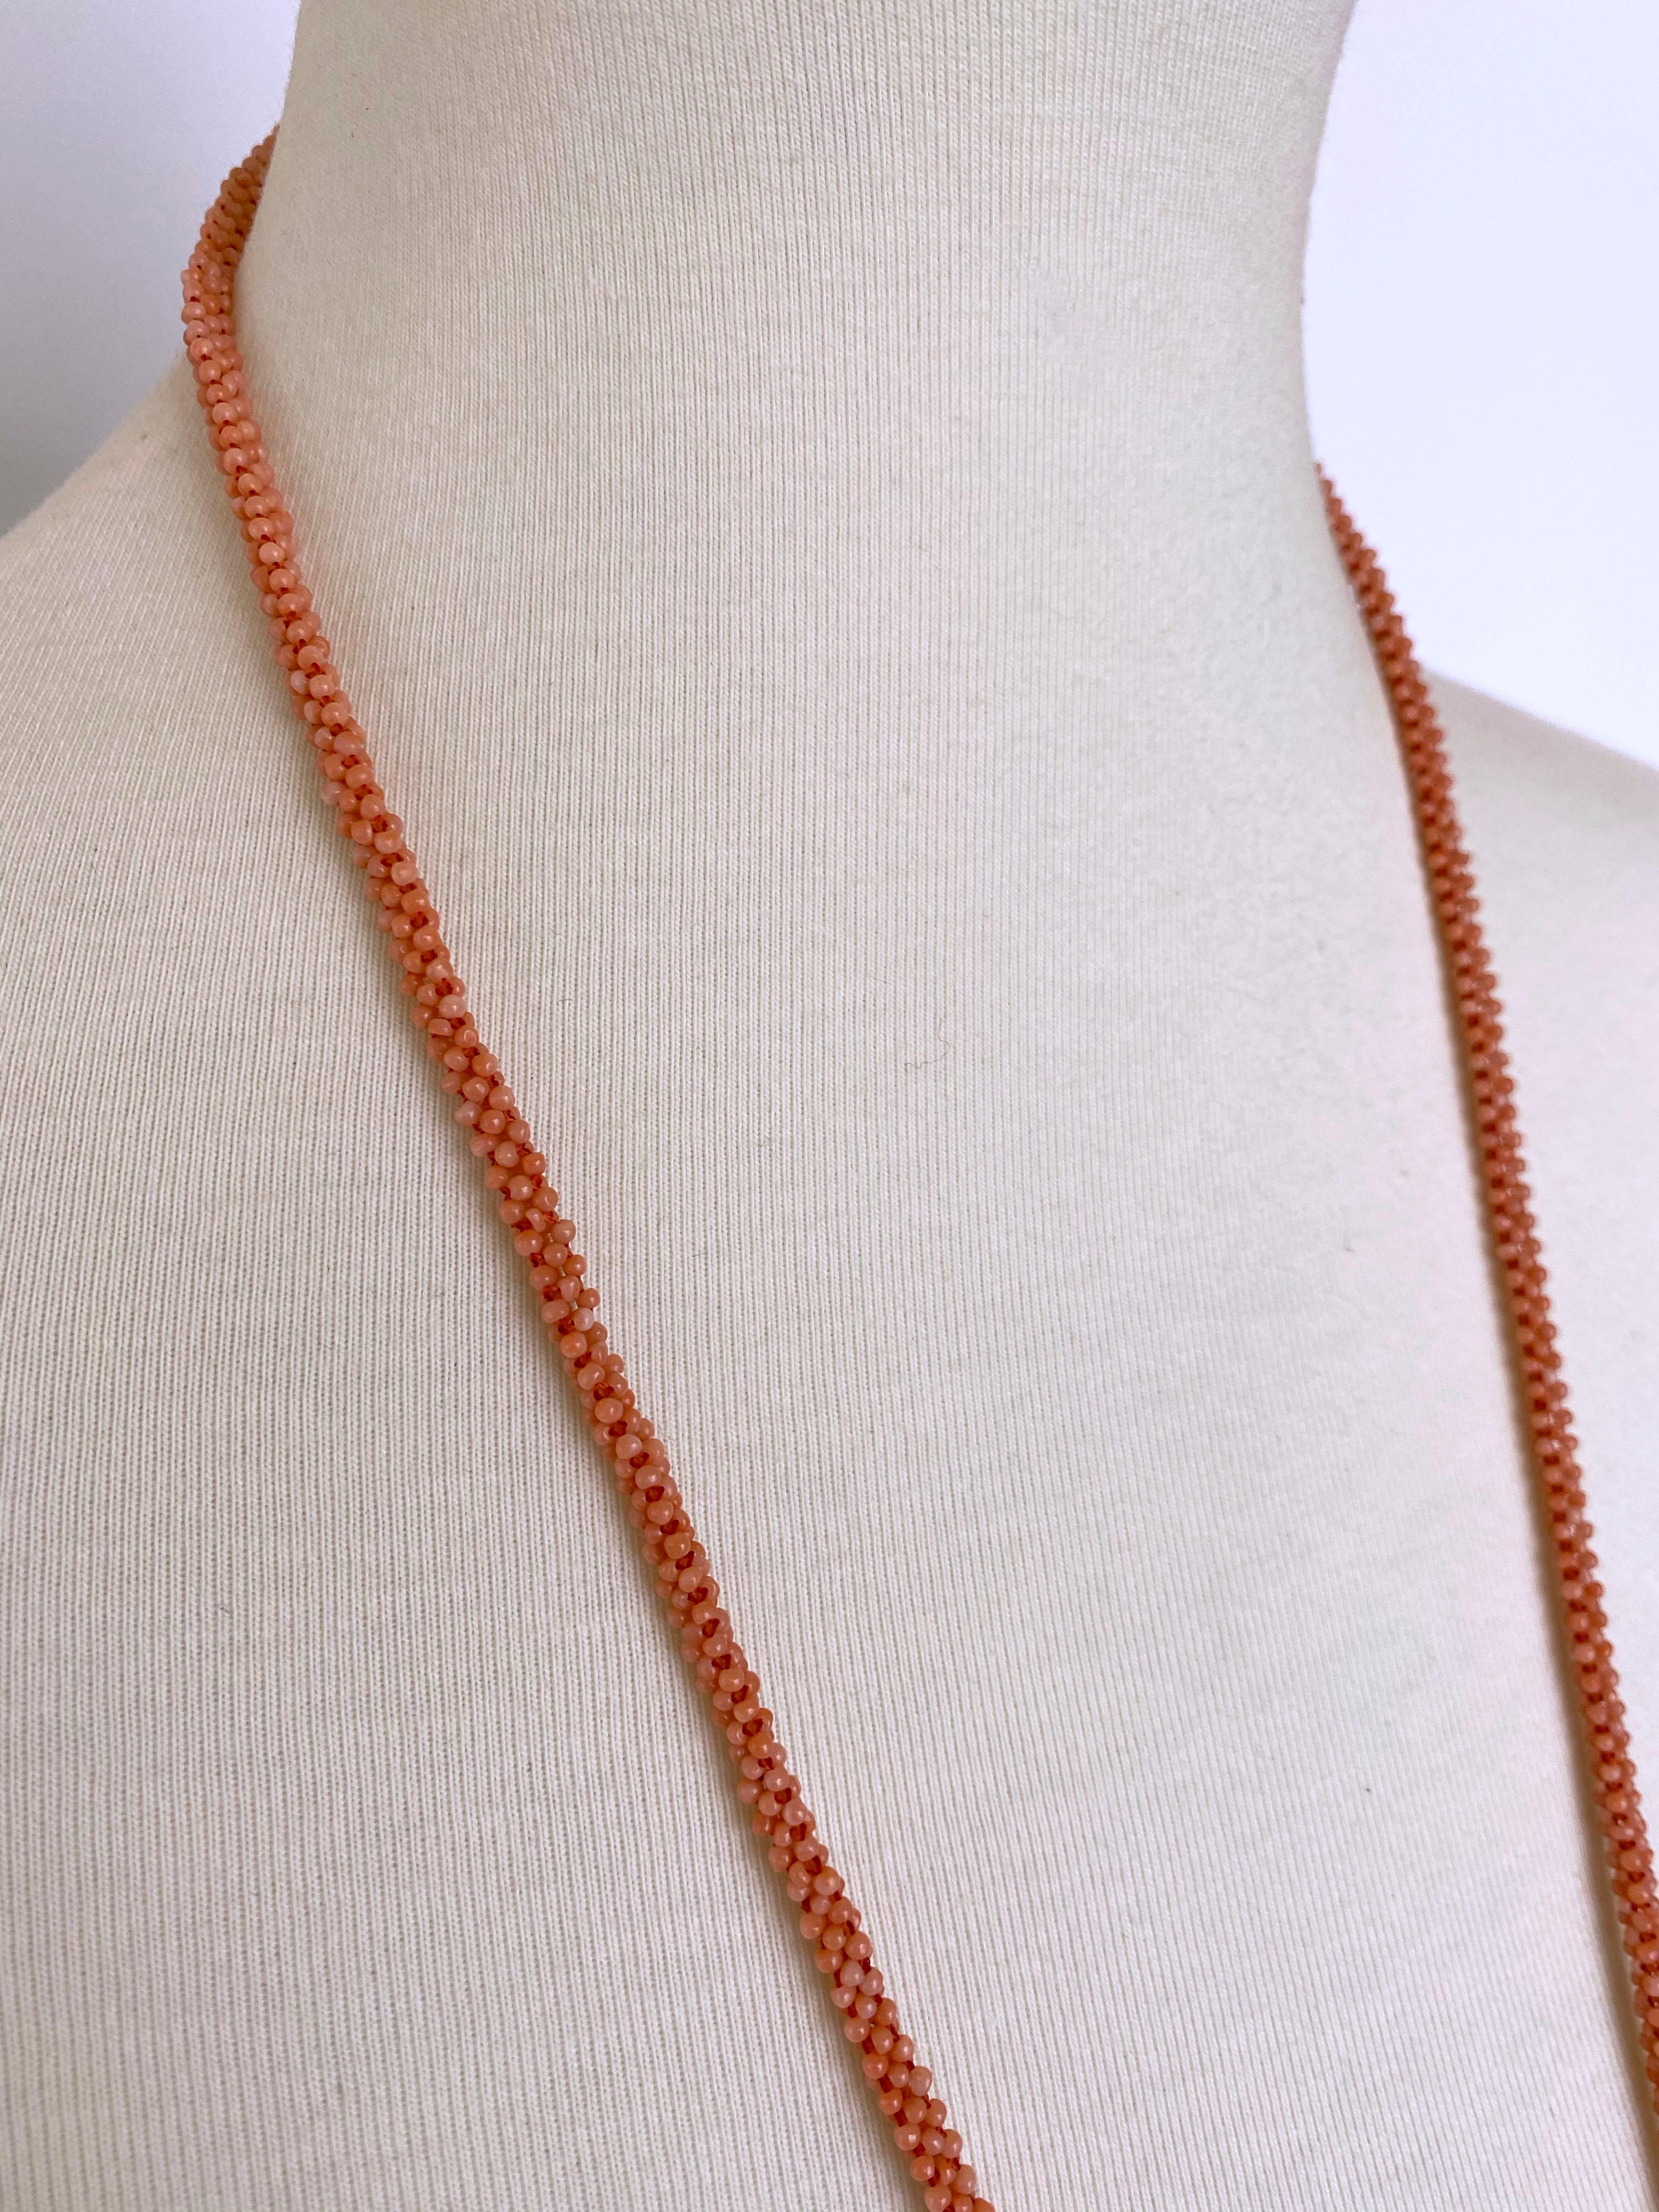 Bead Marian J. Woven Mediterranean Coral Rope Necklace with 14K White Gold and Tassel For Sale